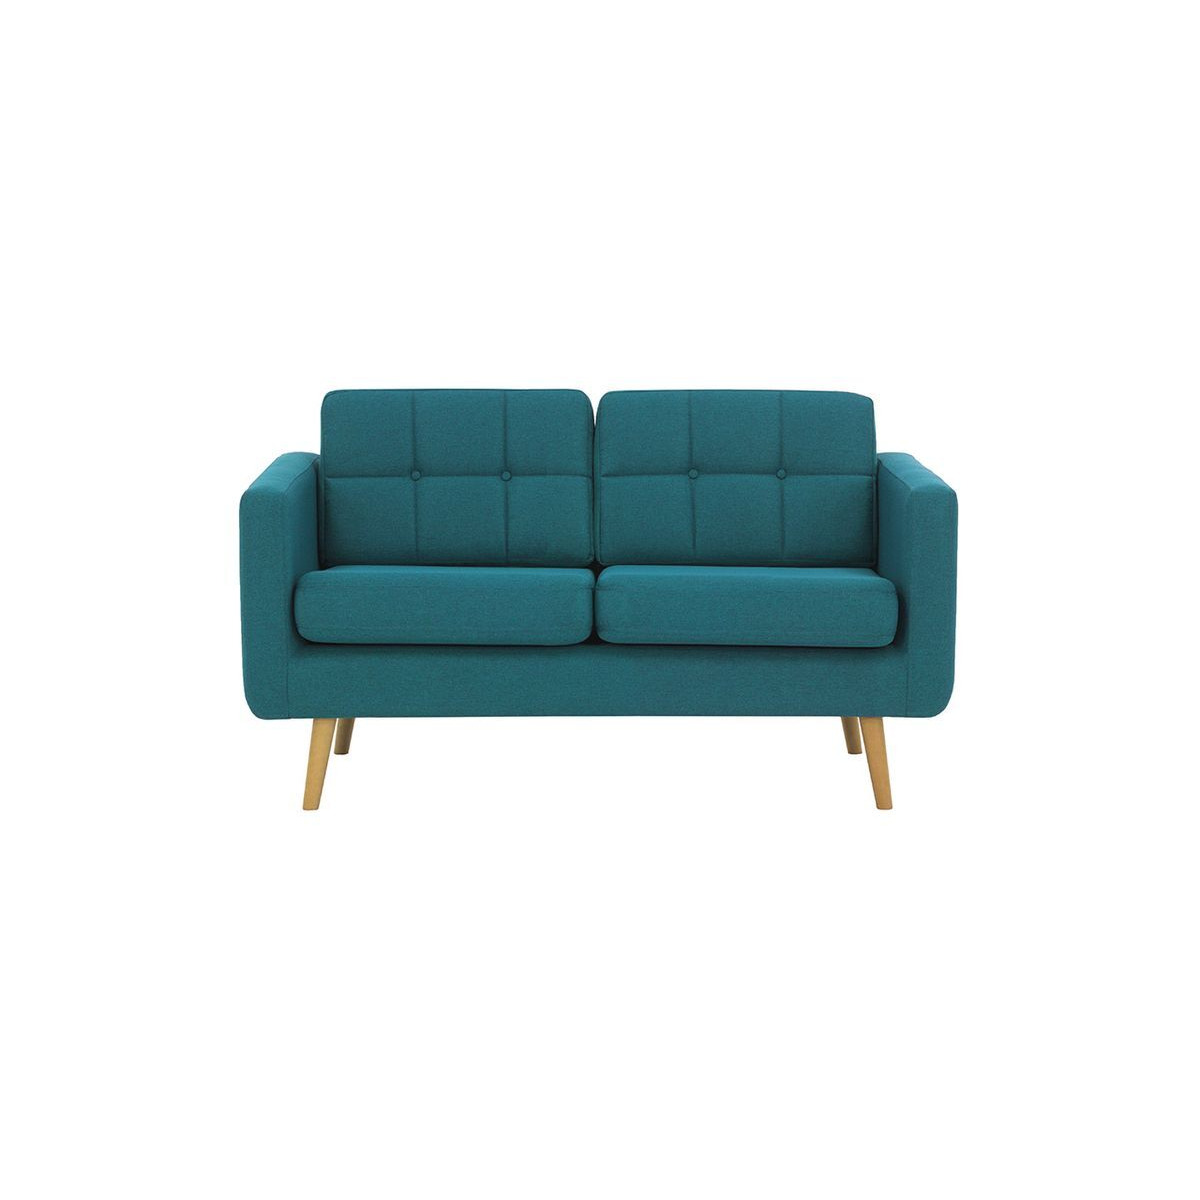 Brest 2 Seater Sofa, turquoise - image 1